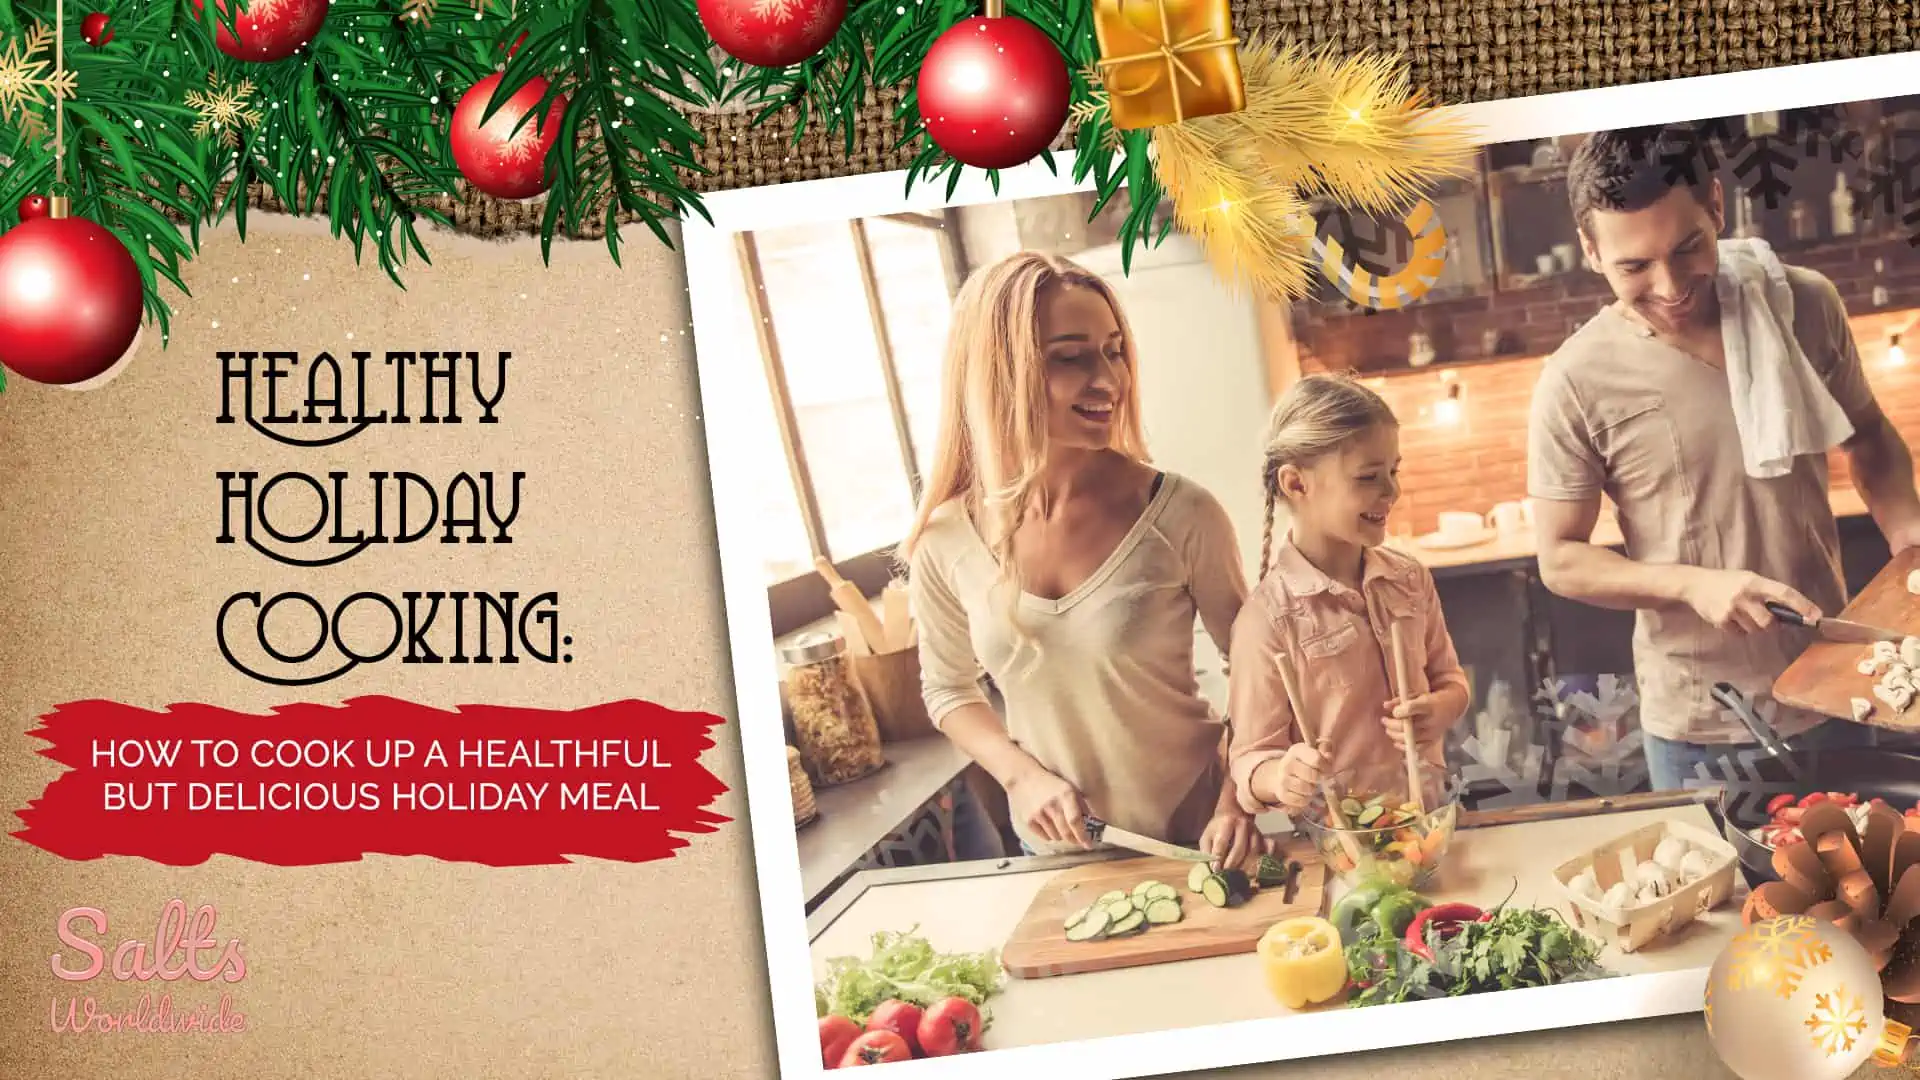 Healthy Holiday Cooking - How to Cook Up a Healthful But Delicious Holiday Meal